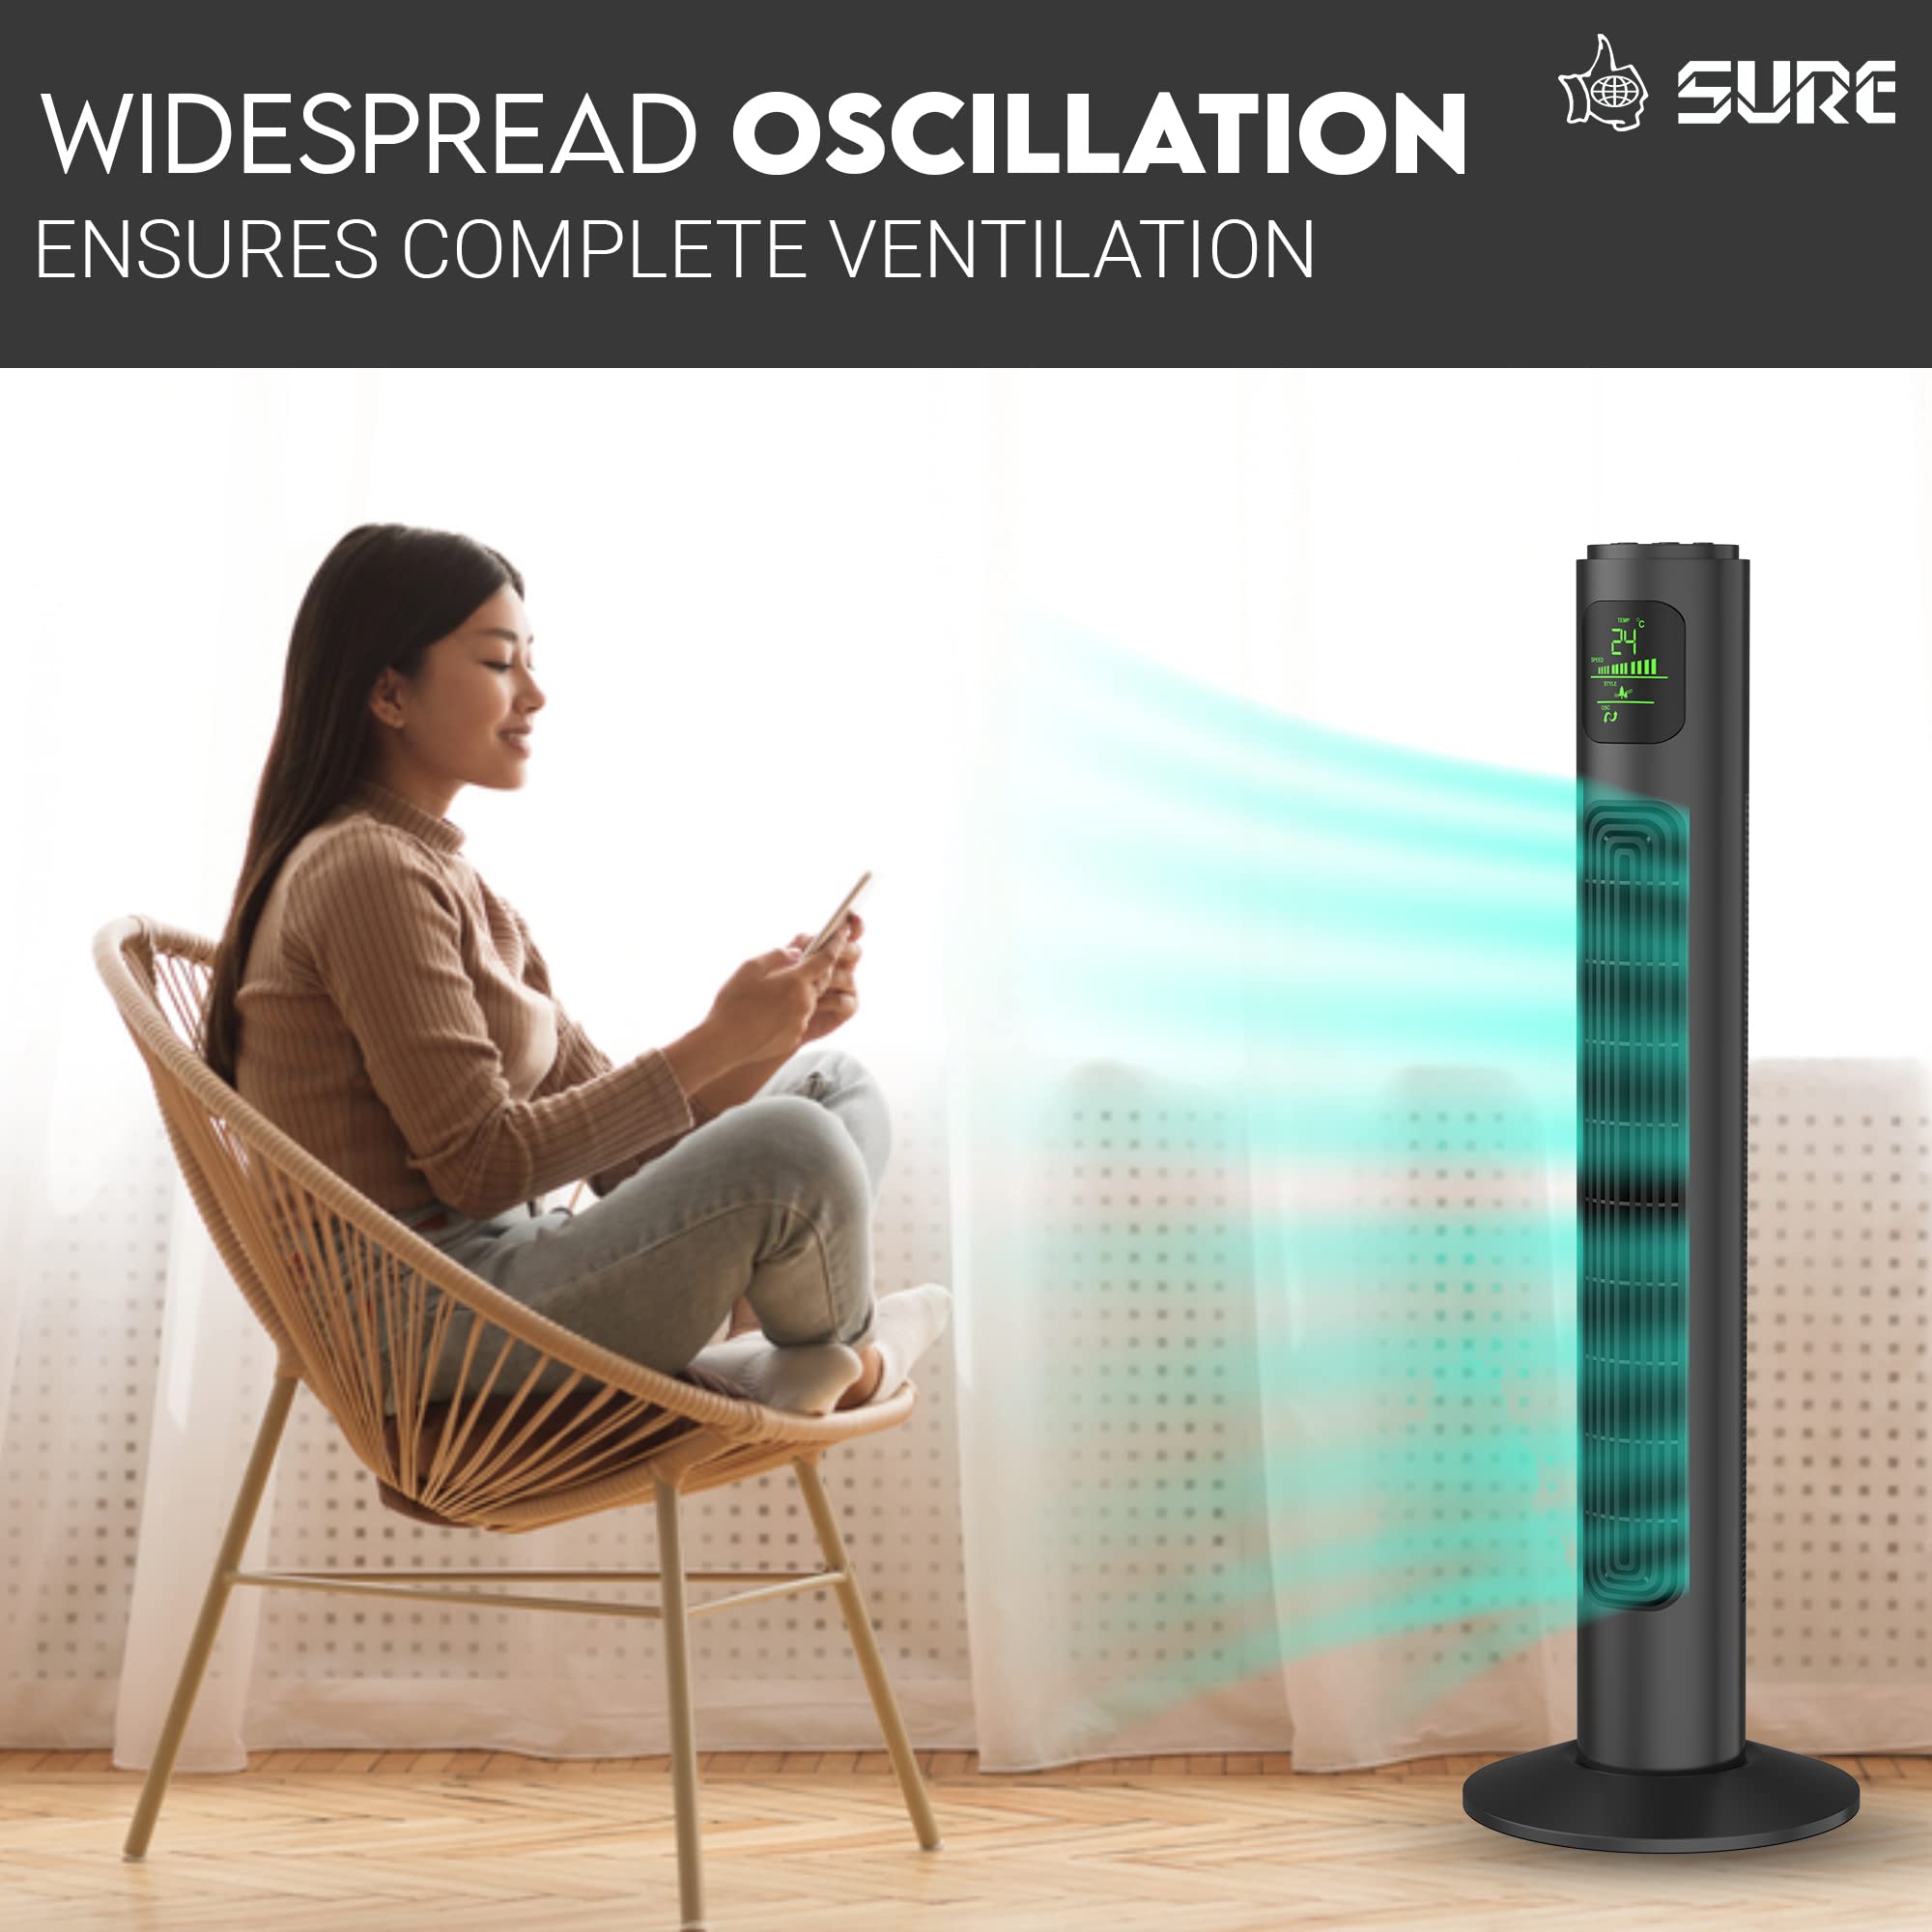 Sure Tower Fan with Remote Control, Bladeless Powerful with 3 Speeds, Timer Function, Standing Oscillating Fan for Home, Bedroom & Office, Black شور تعمل على كهرباء- مراوح ارضيه